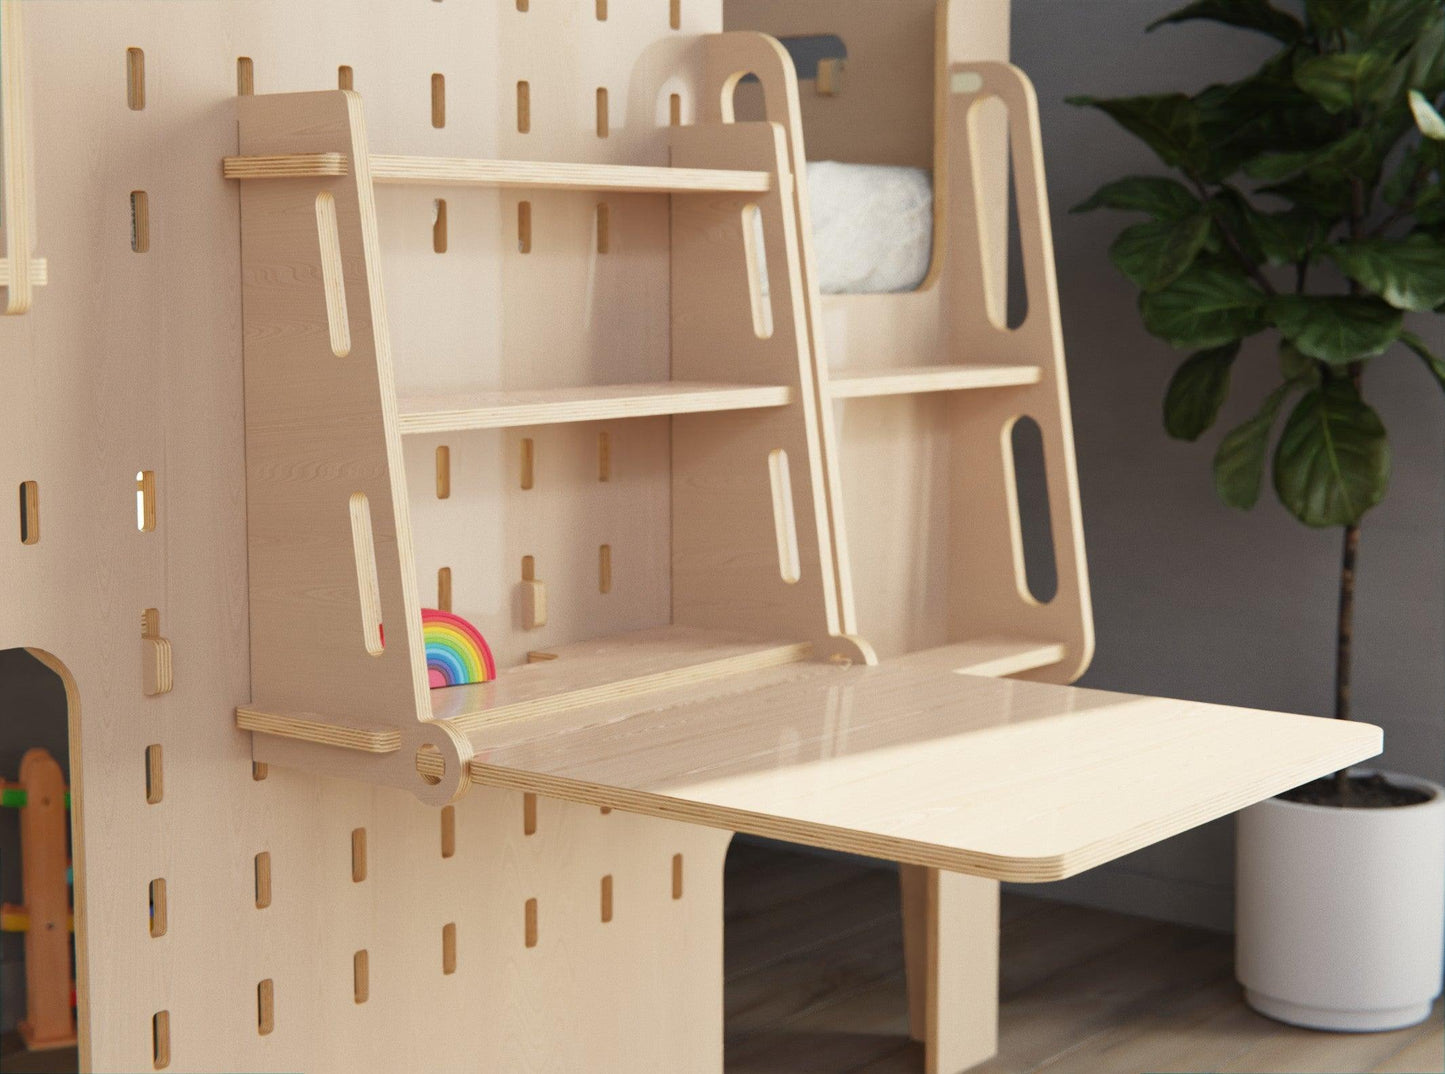 Educational space: Low loft bed for children with attached study desk.